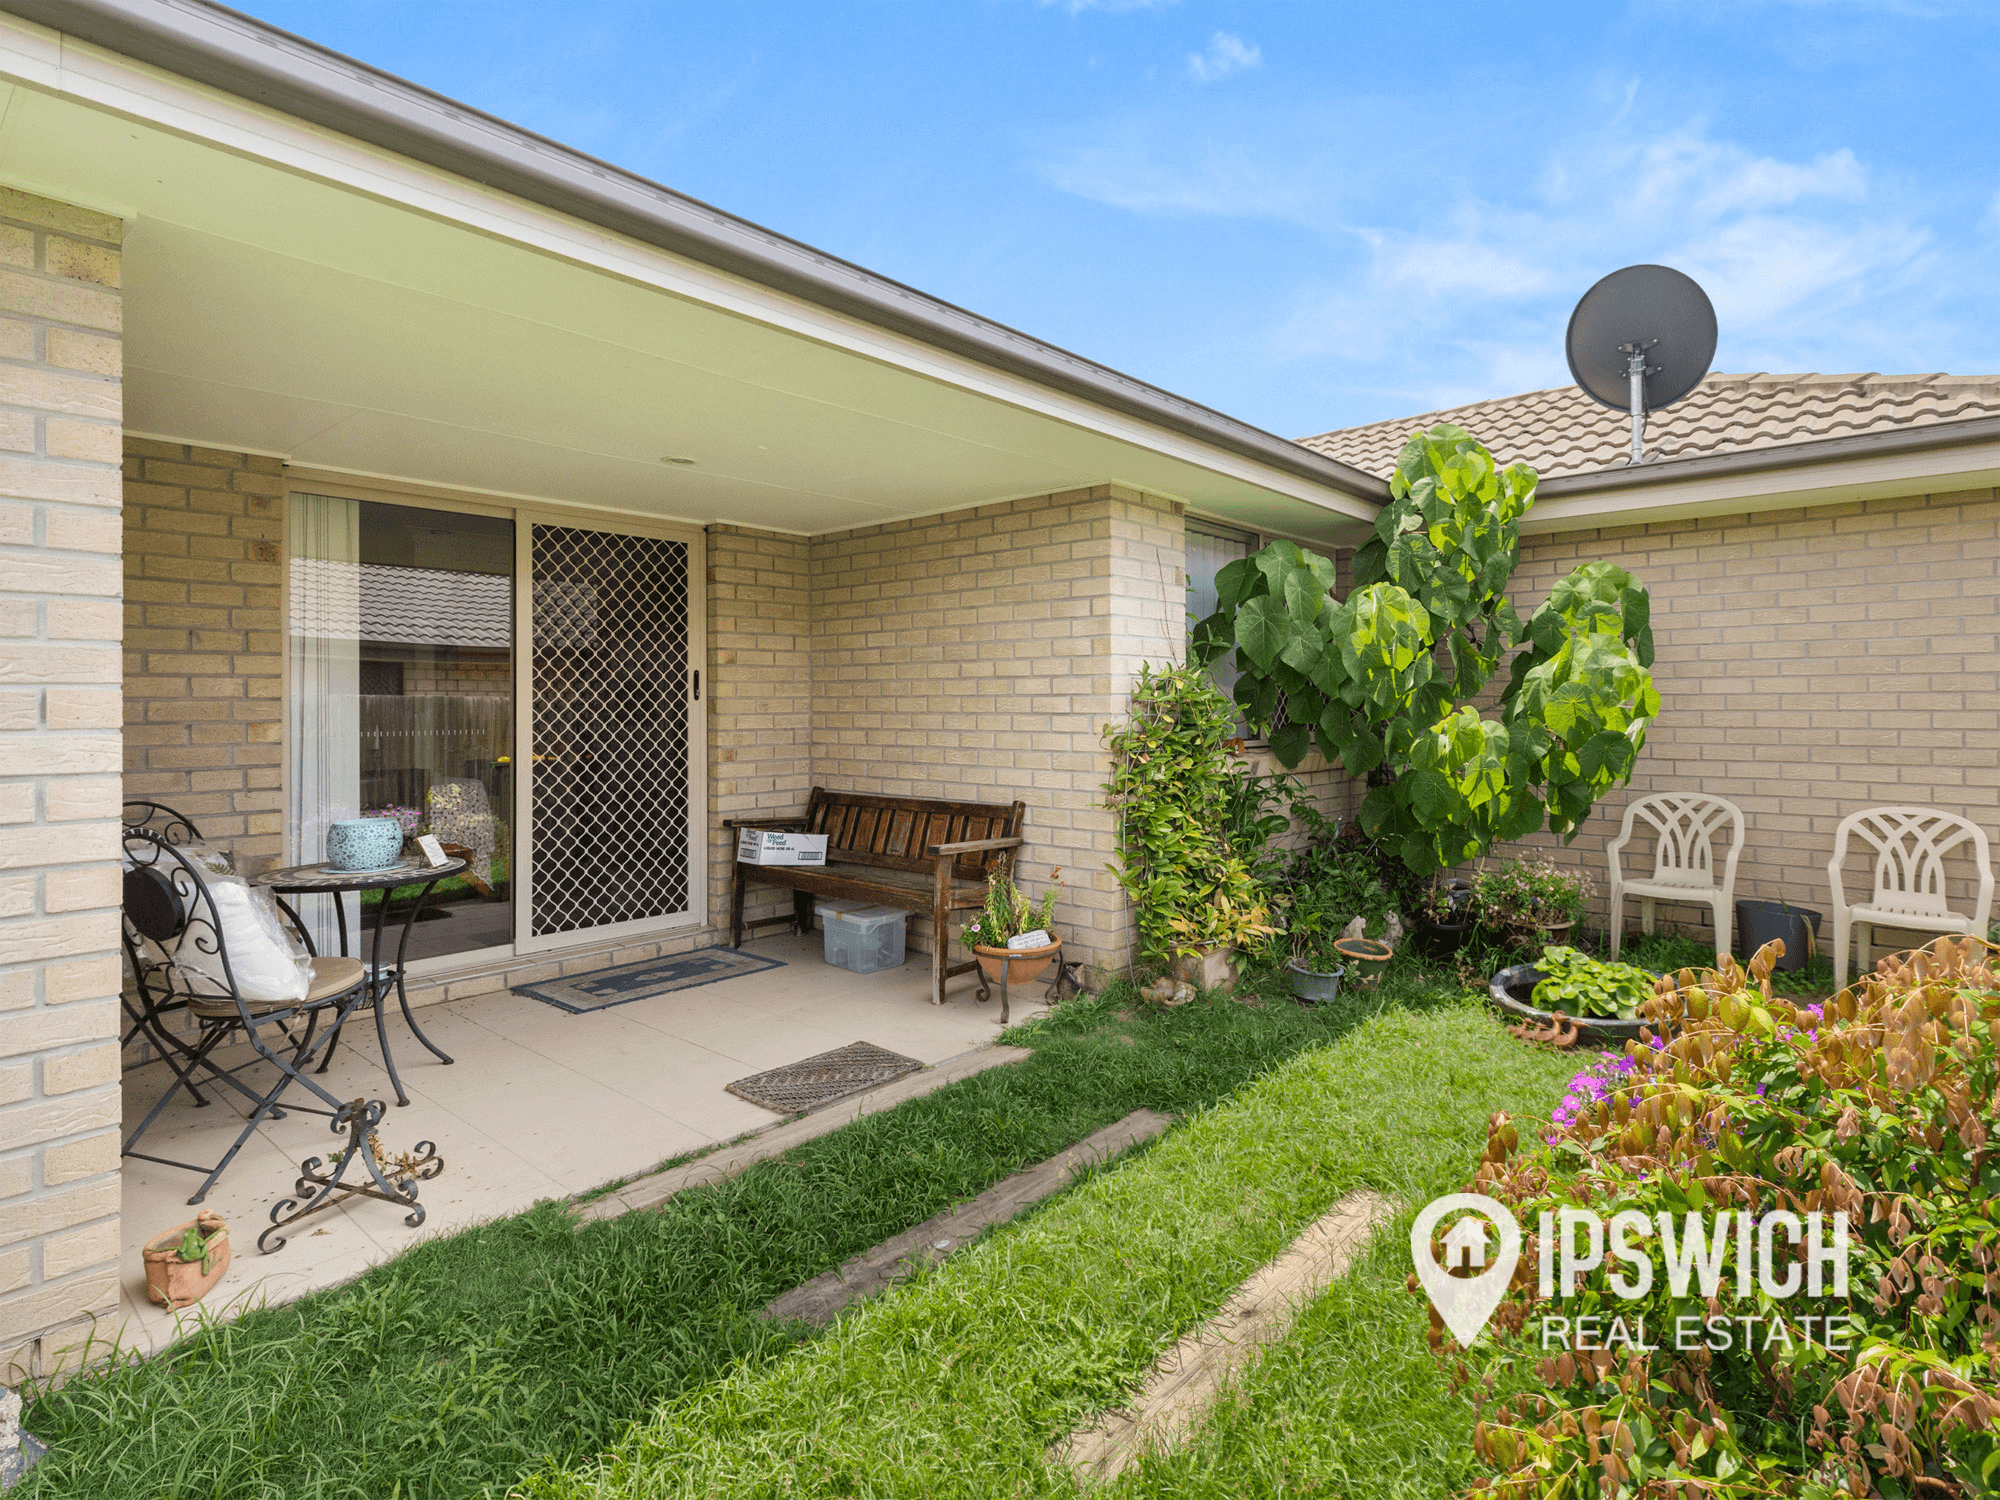 18 Hayes Street, LAIDLEY, QLD 4341